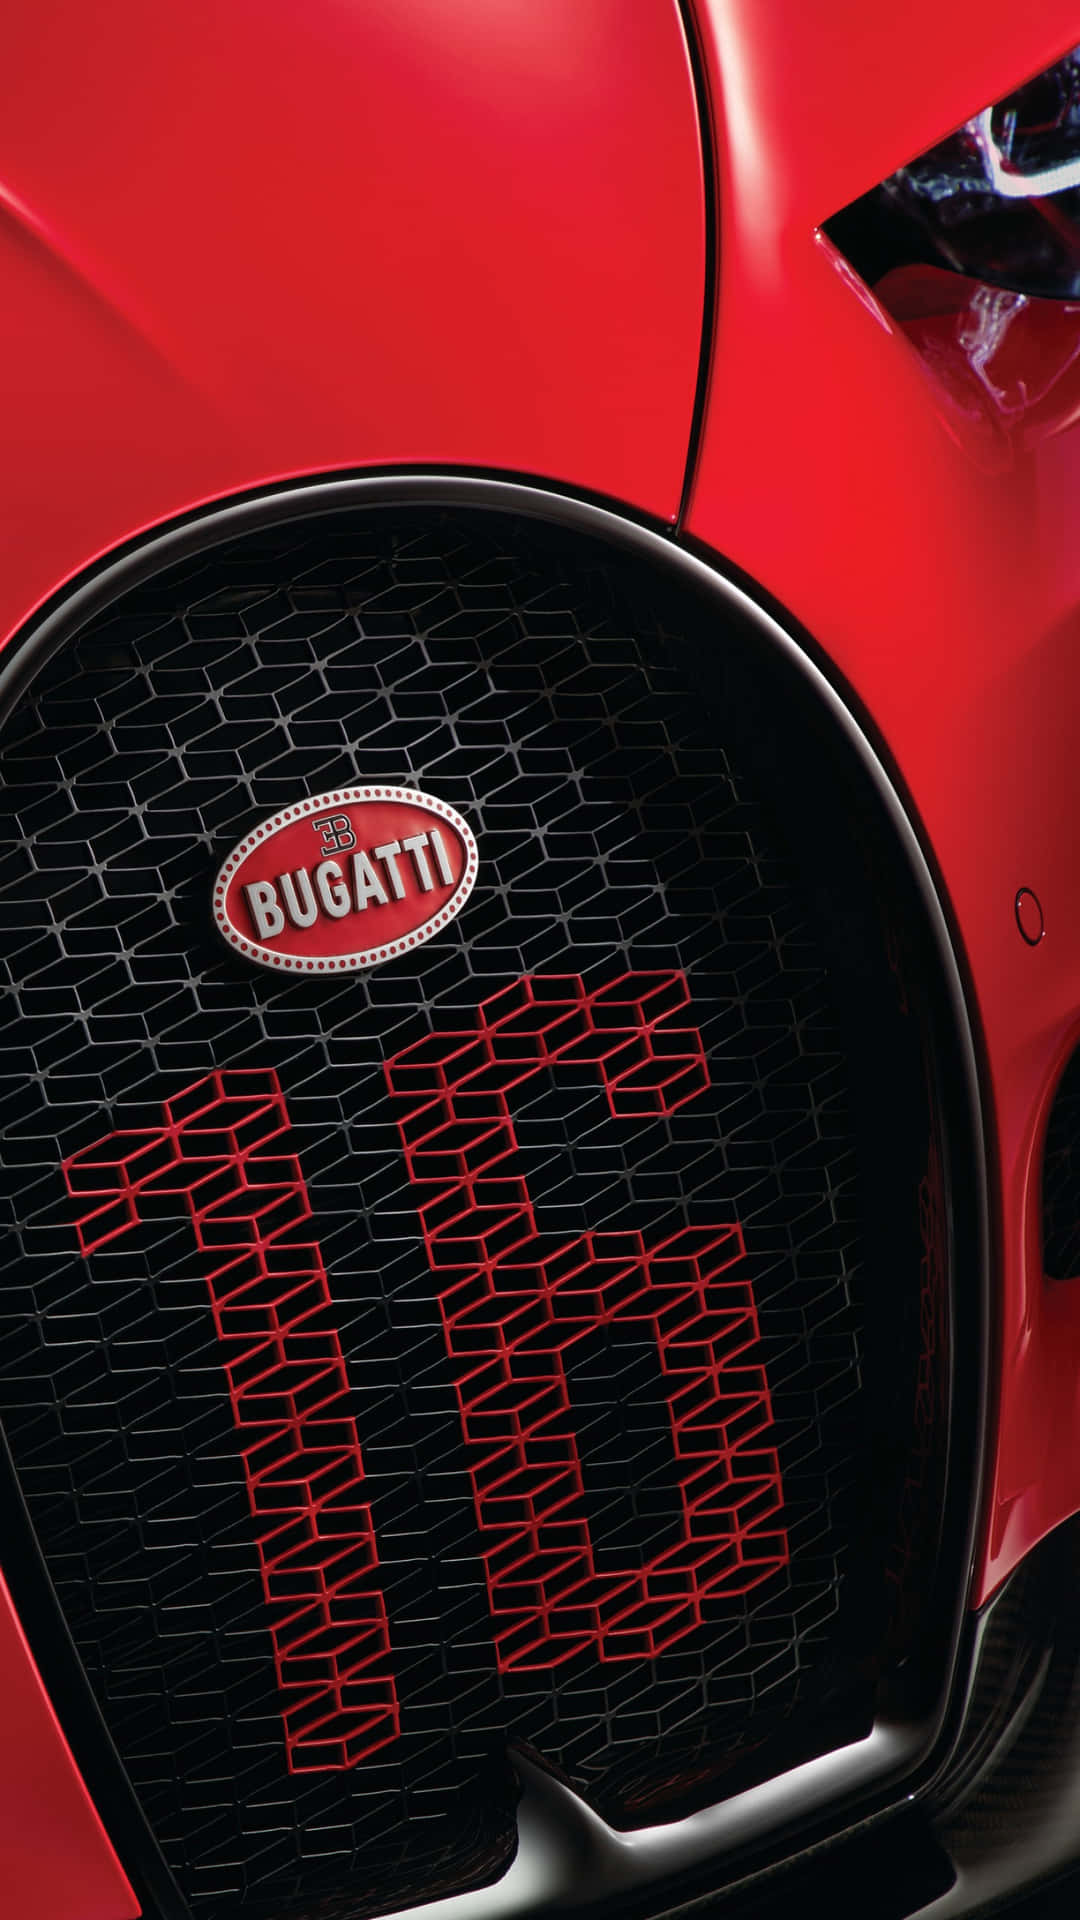 An Up-Close Look At The Iconic Bugatti Phone Wallpaper